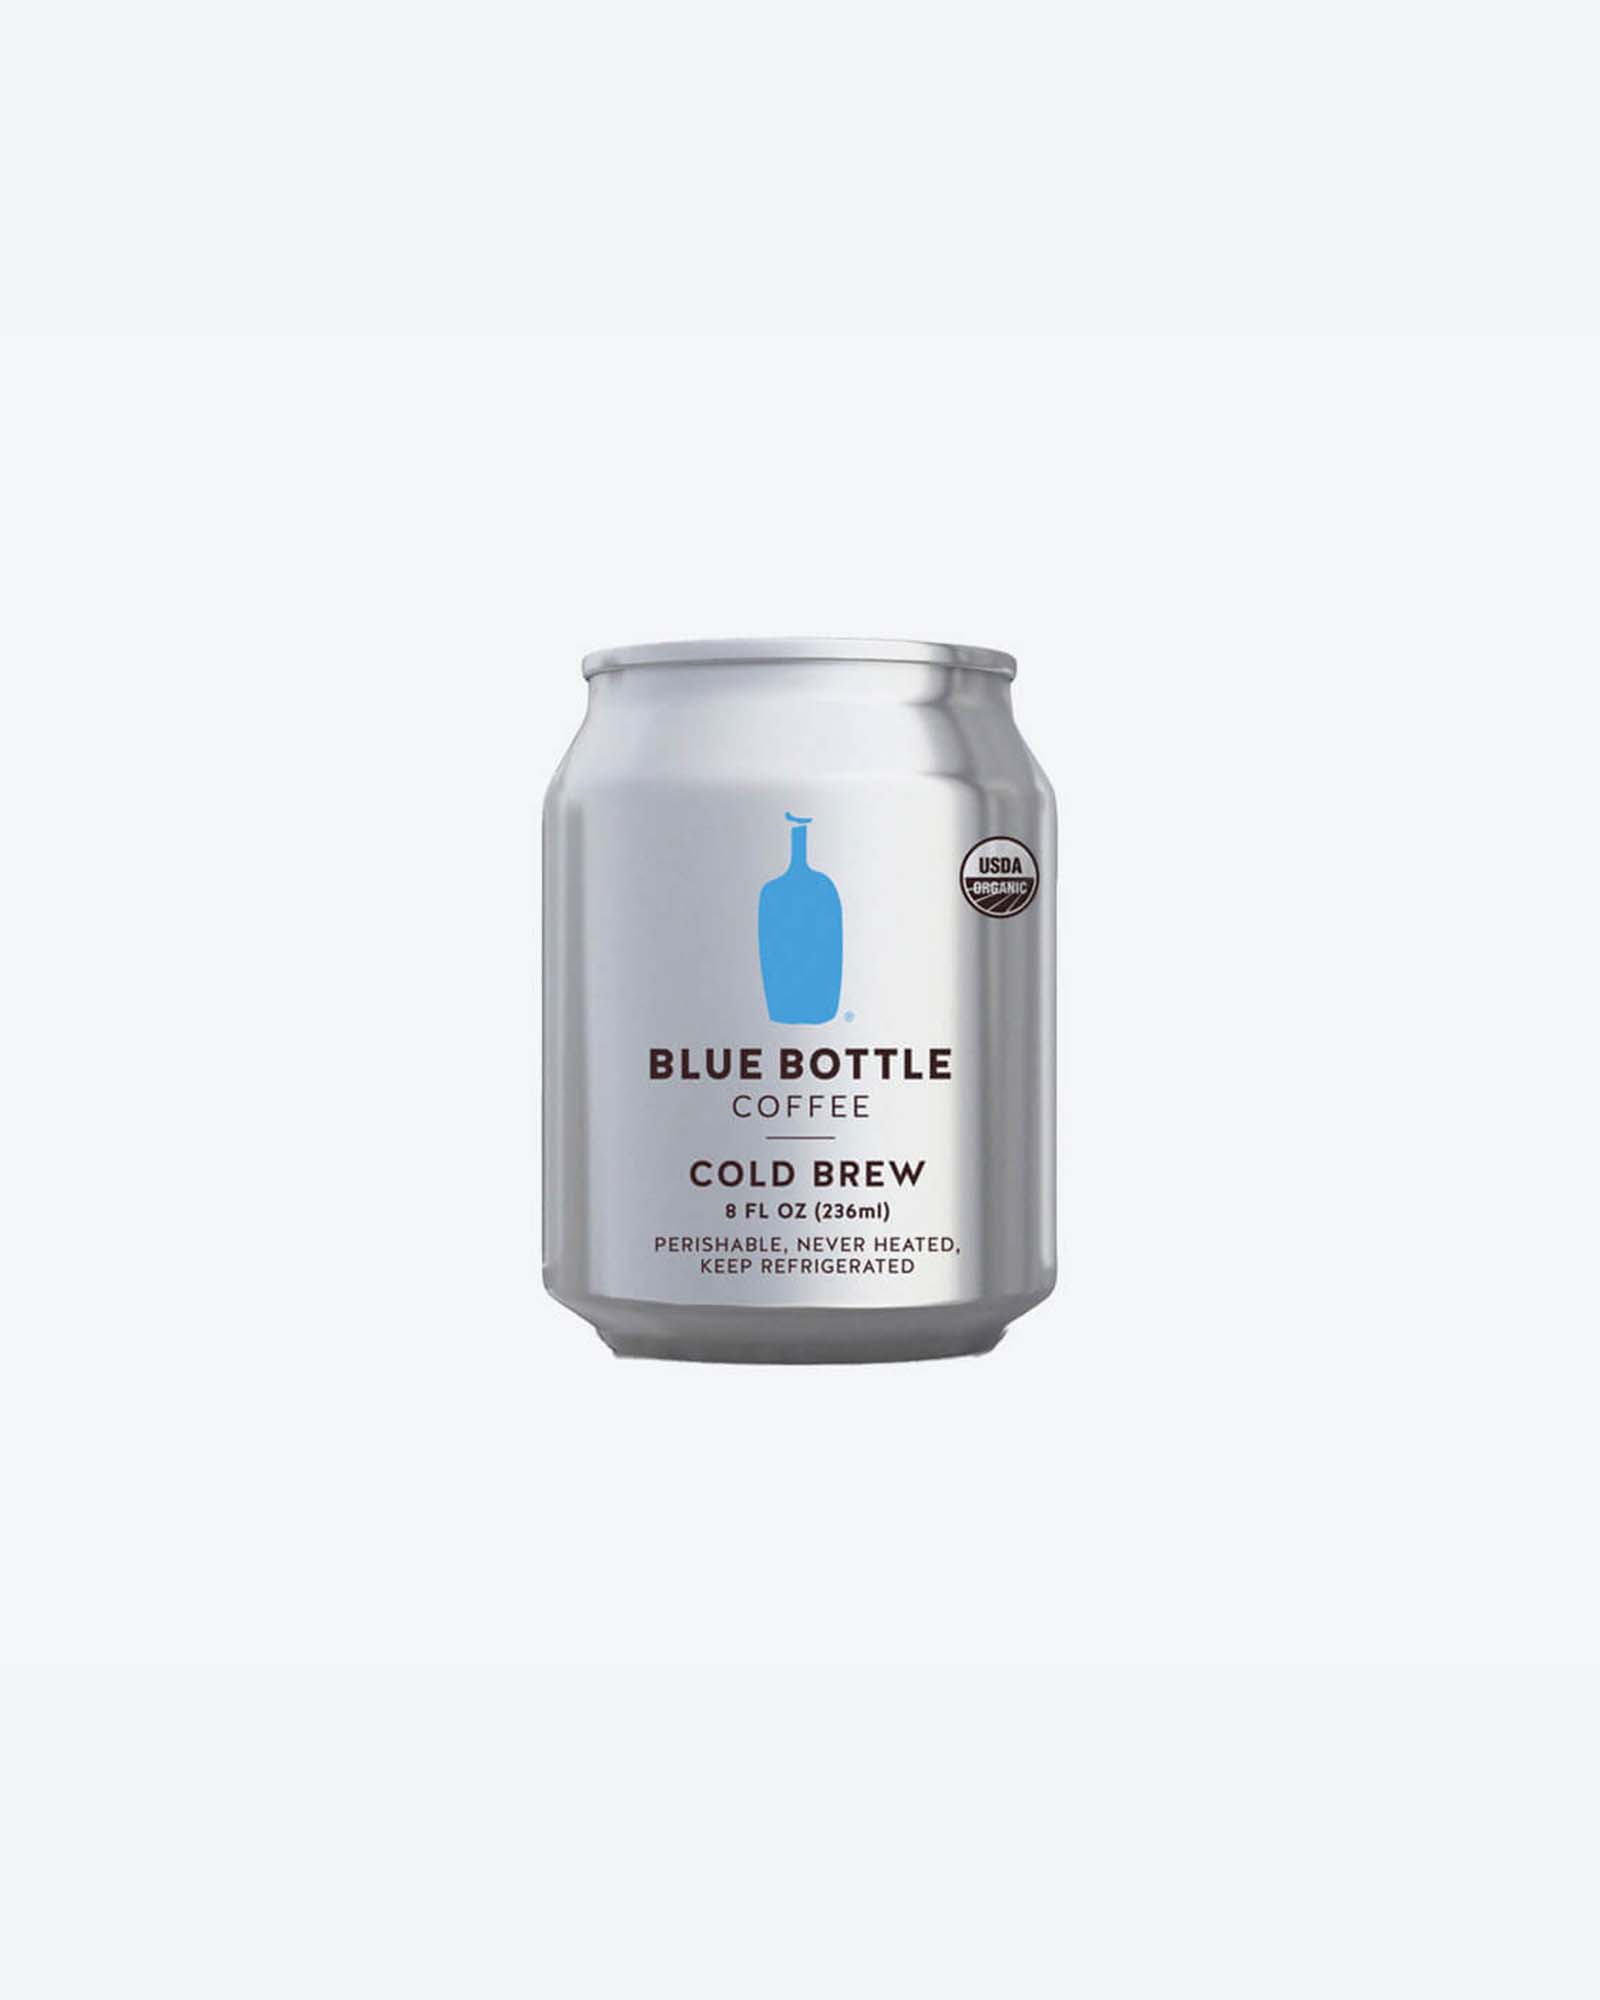 BLUE BOTTLE BRIGHT COLD BREW COFFEE 8OZ CAN